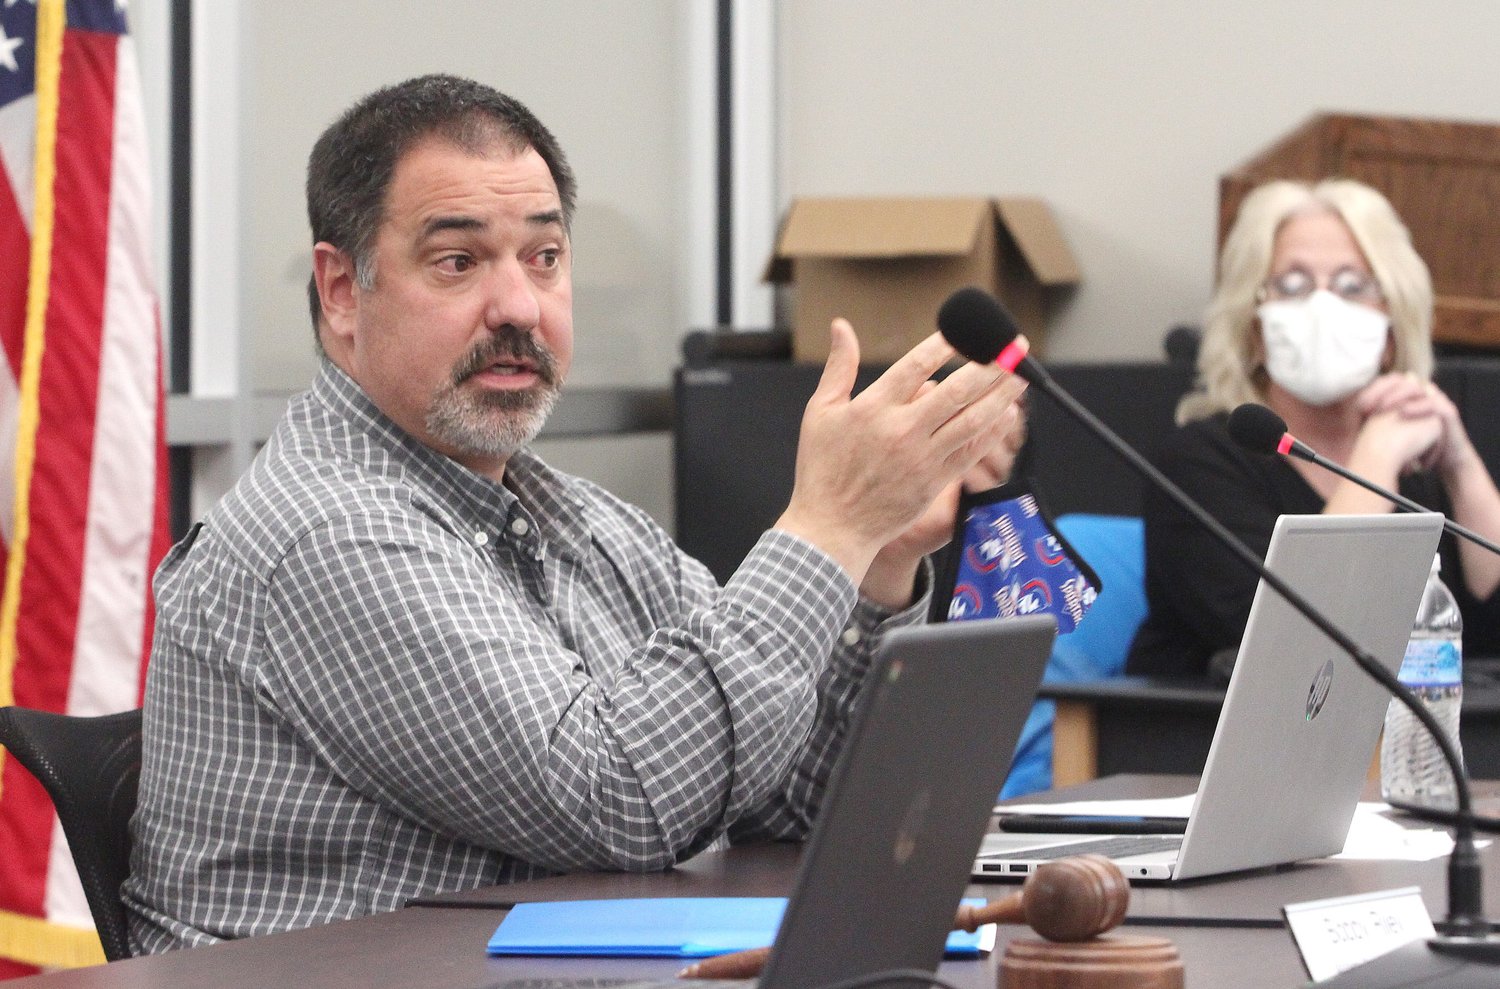 Moberly Public Schools Superintendent Dr. Tim Roling explains some agenda items Tuesday to school board members a meeting held at the high school. The district is considering to place a bond issue on the April 2021 election ballot that would not increase taxes.